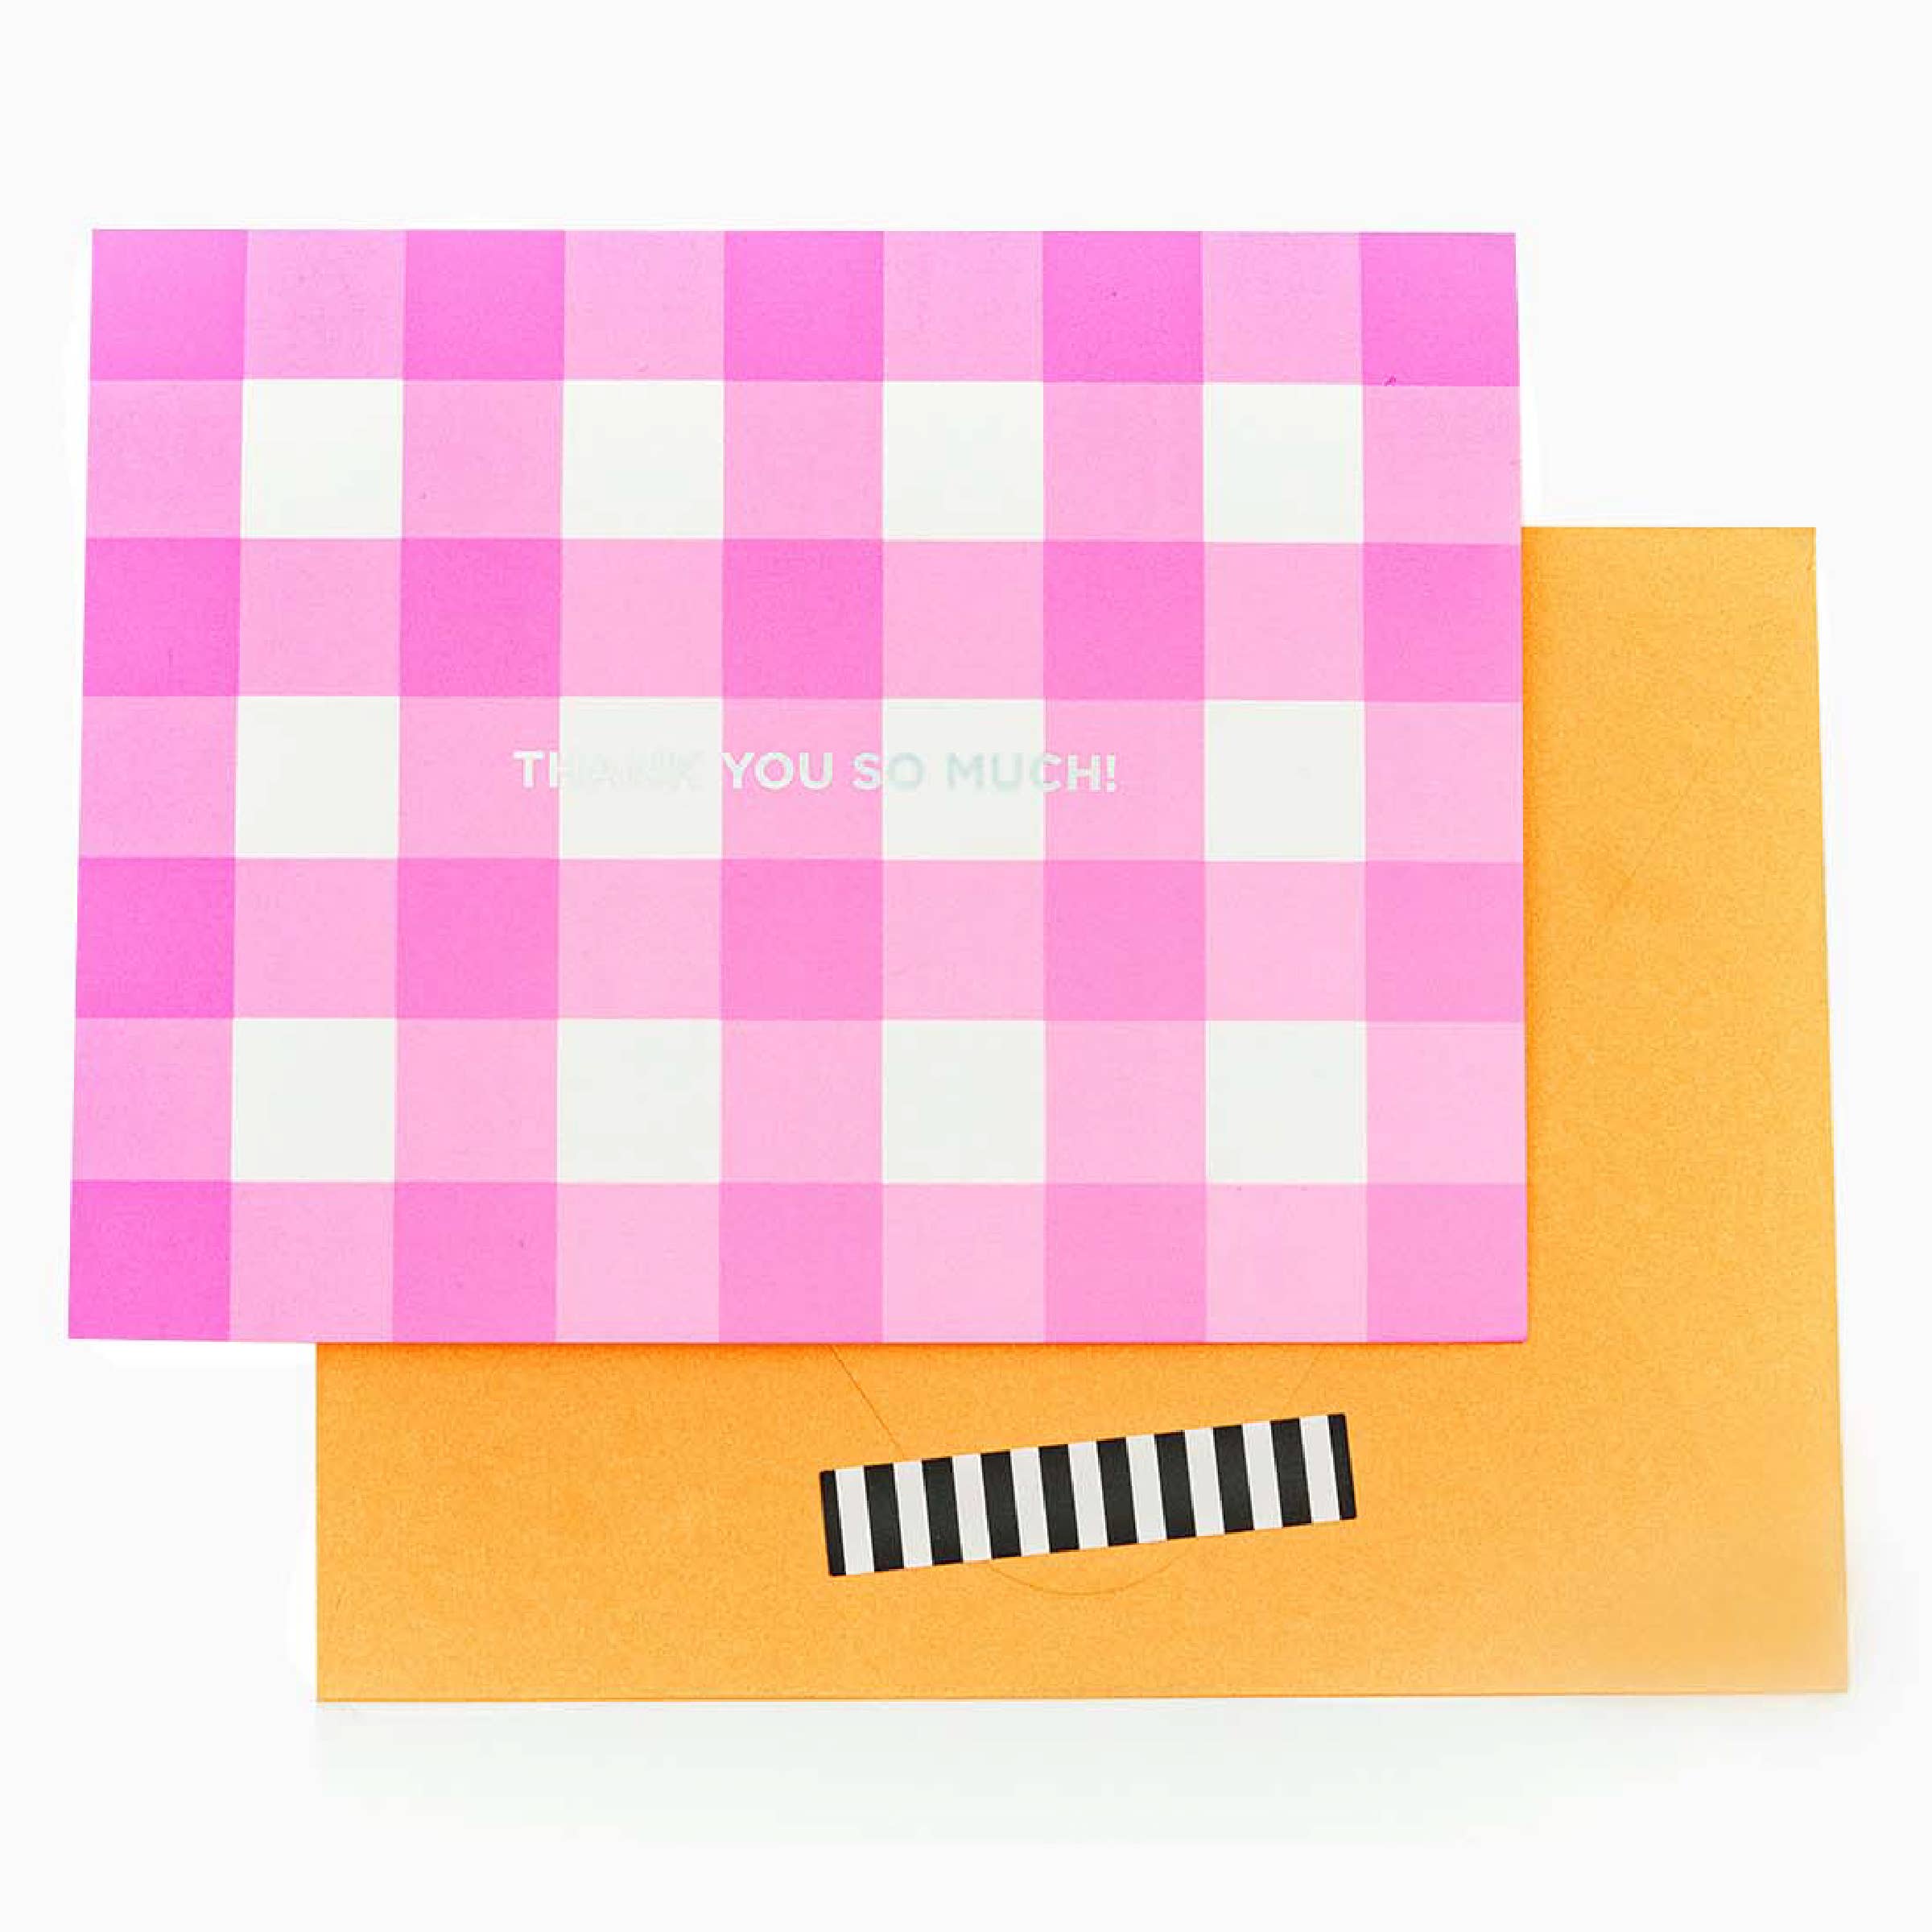 SALE! Thank You Boxed Note Cards - Bright, fun notecards